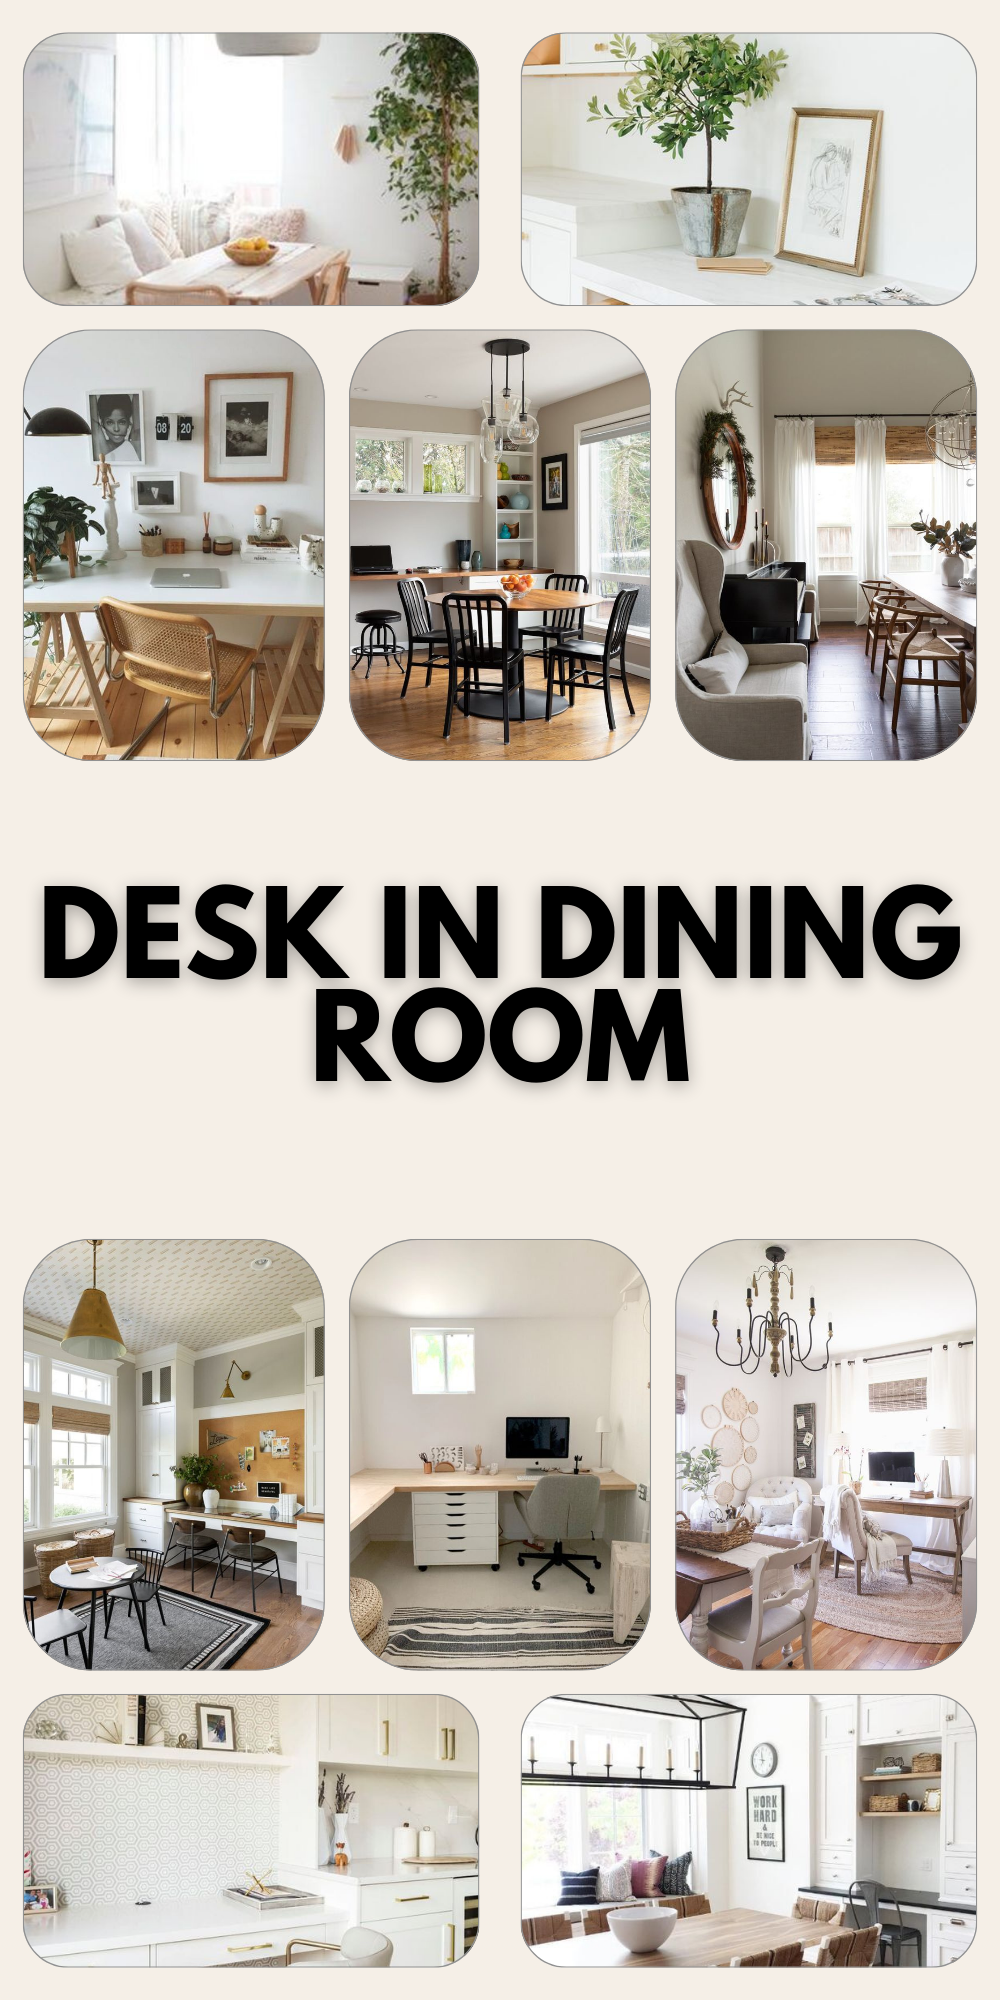 Innovative Desk in Dining Room Designs for Chic Home Offices